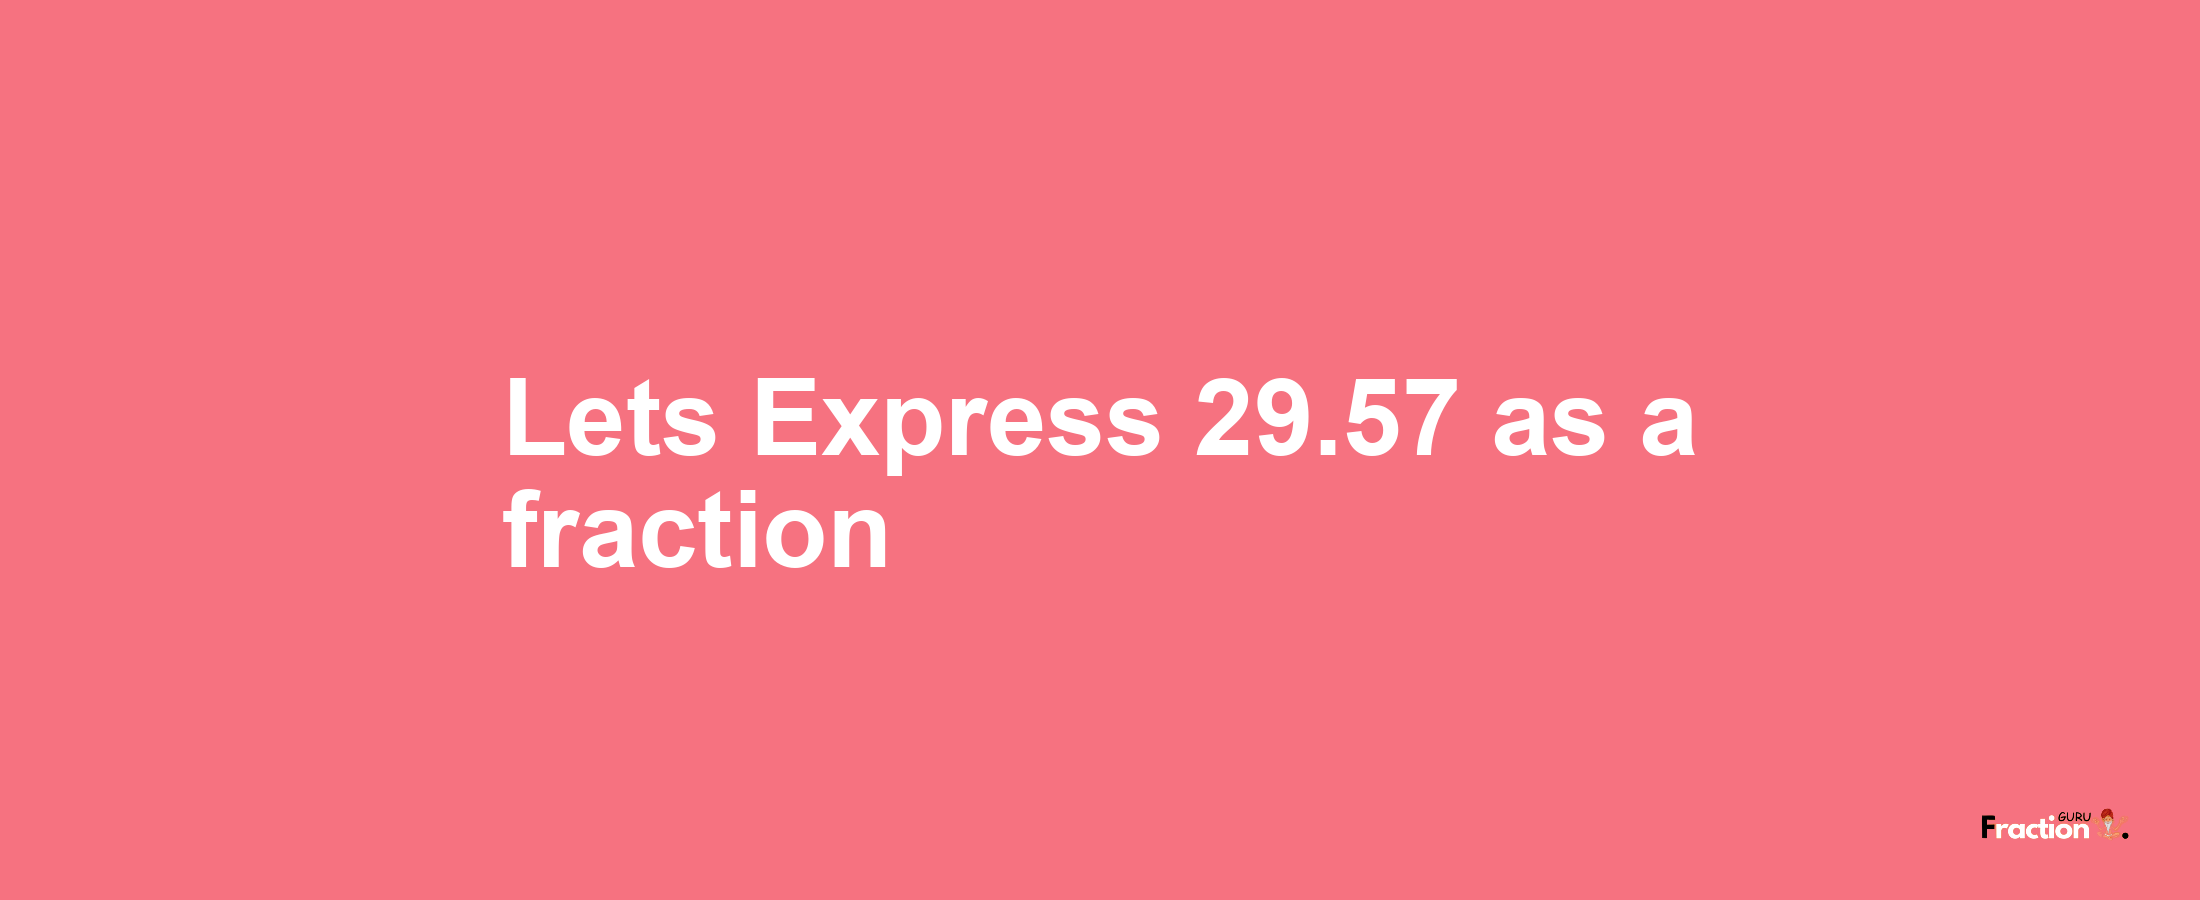 Lets Express 29.57 as afraction